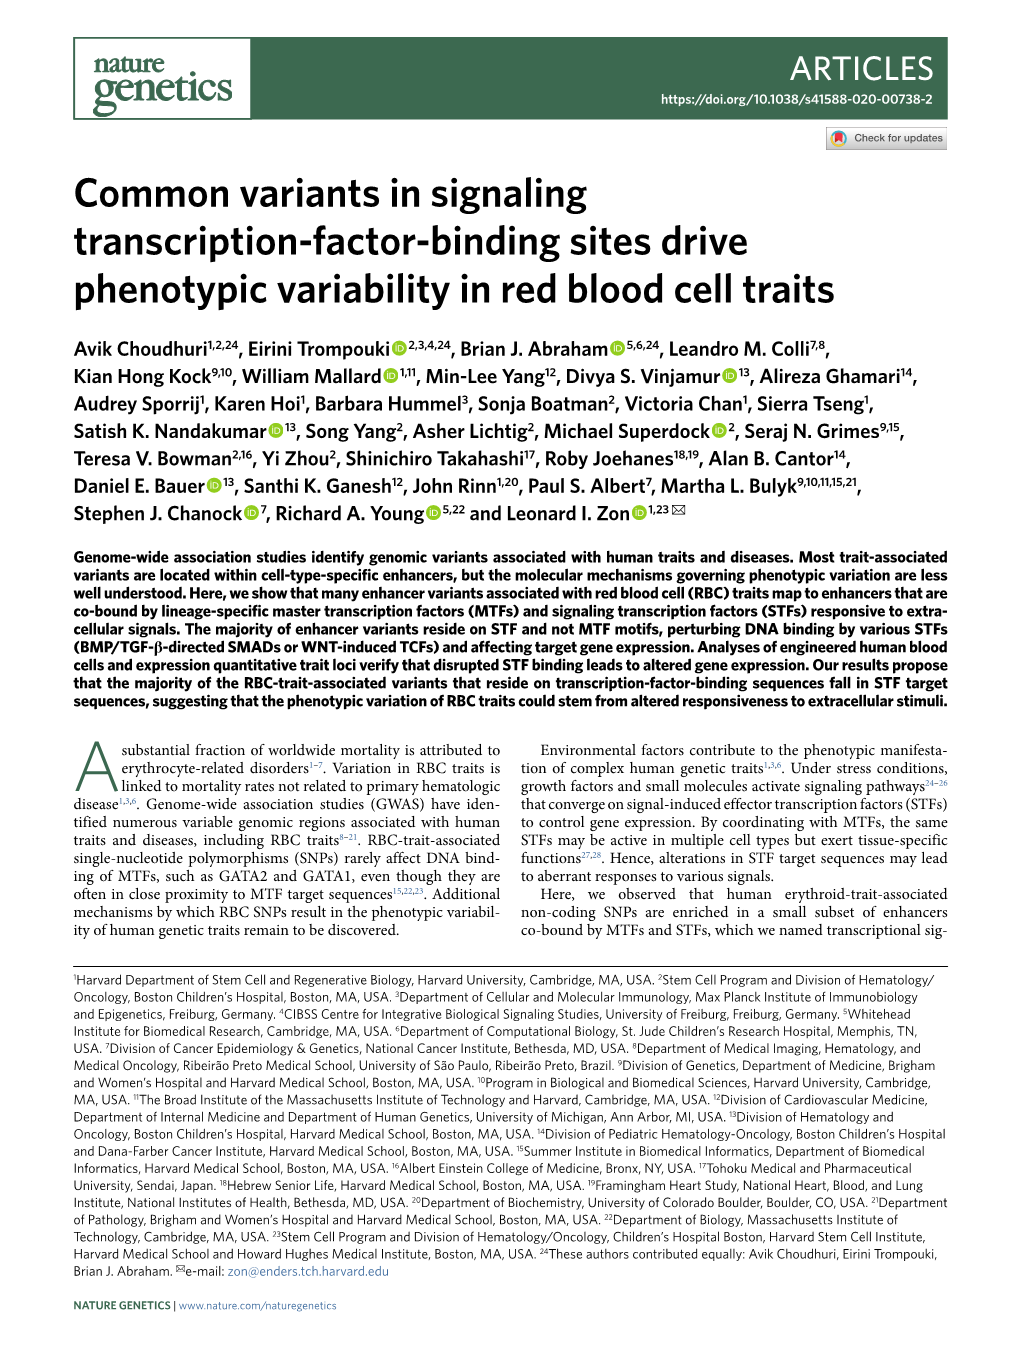 Common Variants in Signaling Transcription-Factor-Binding Sites Drive Phenotypic Variability in Red Blood Cell Traits